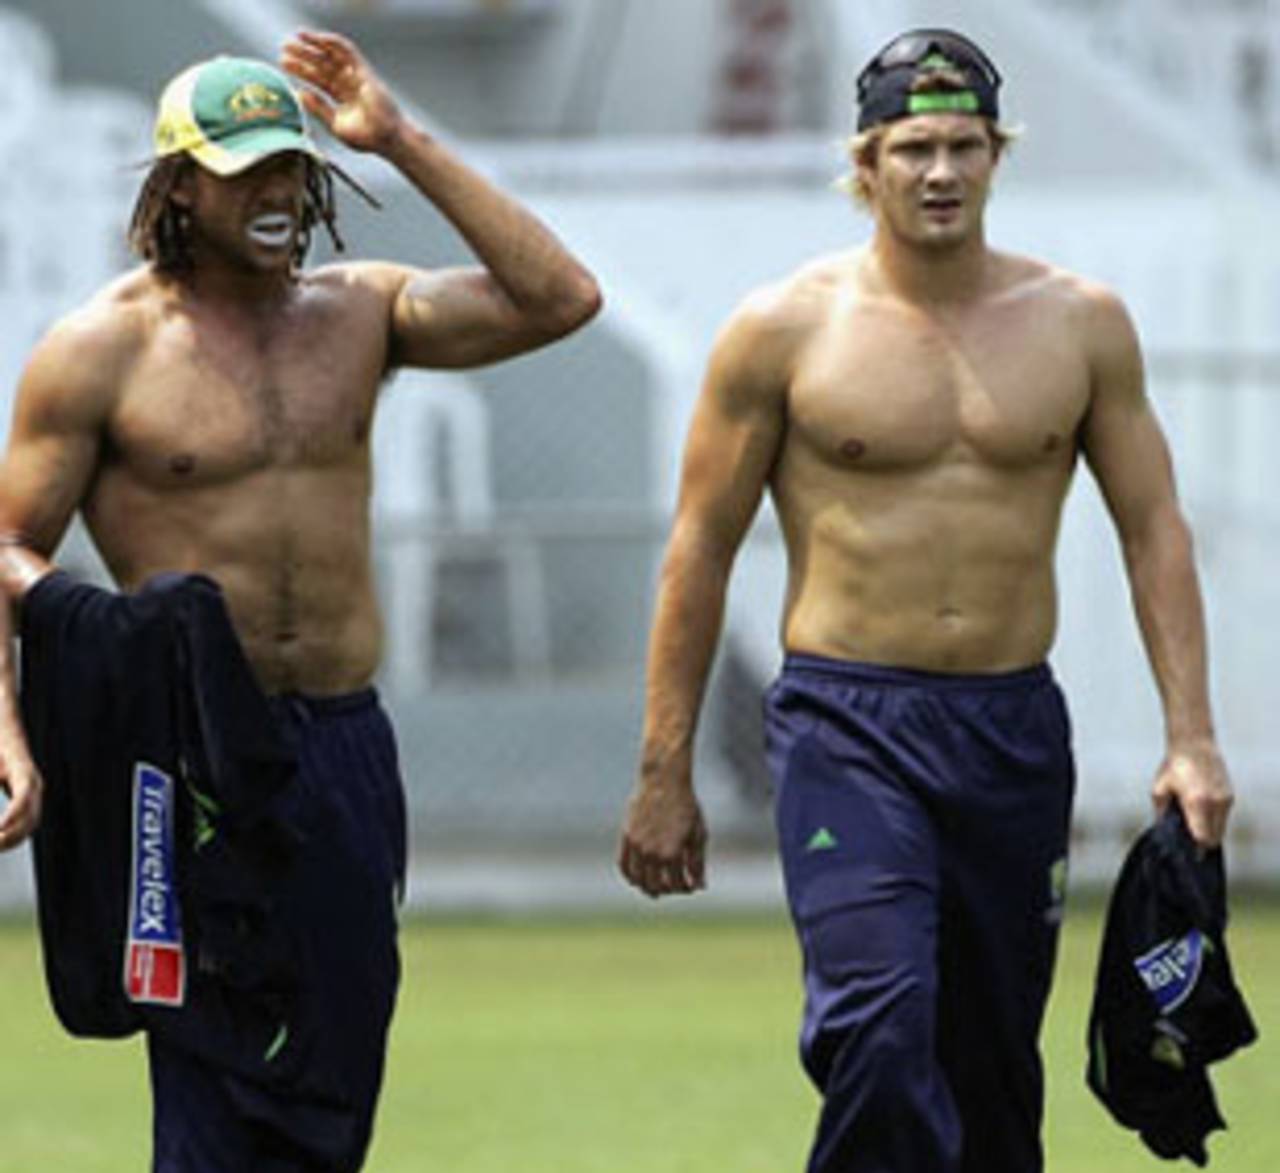 Watto and Symmo: if the biceps don't get you, the abs will&nbsp;&nbsp;&bull;&nbsp;&nbsp;Getty Images